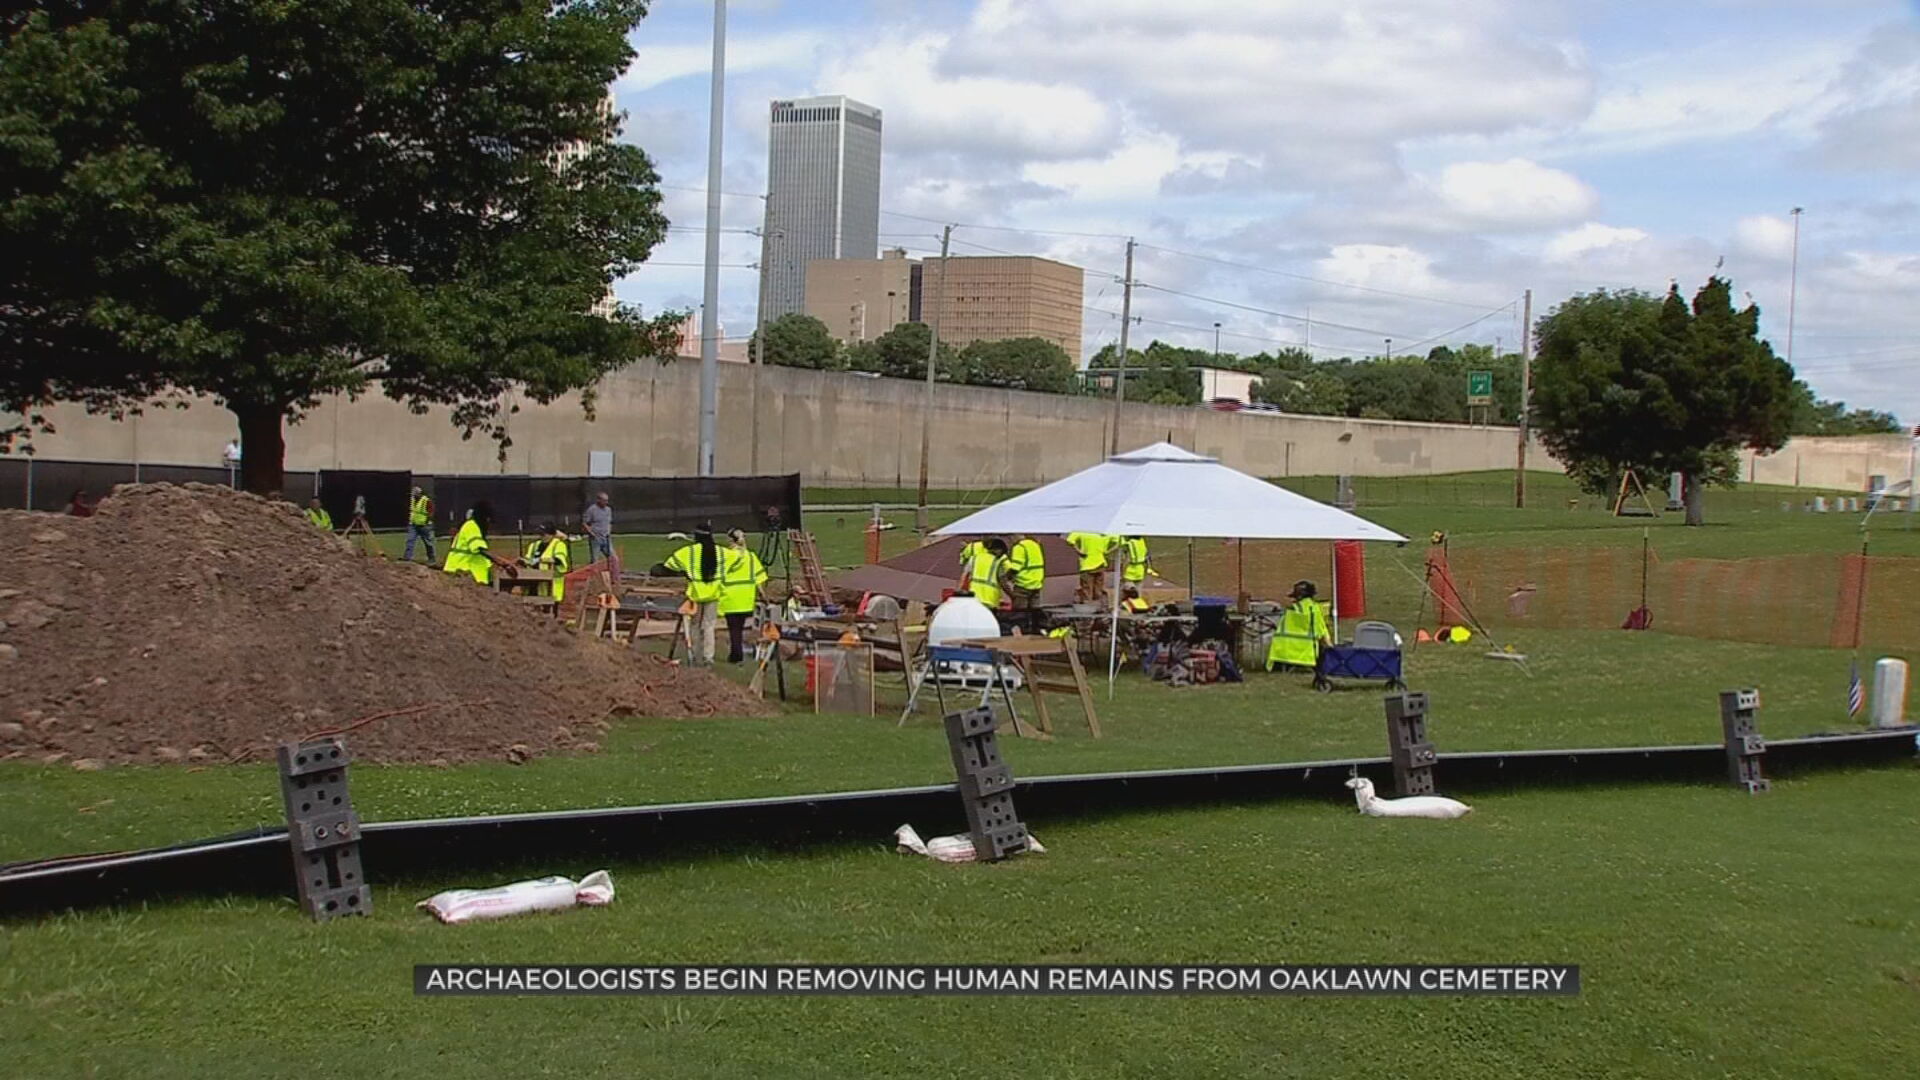 Archeologists Say 27 Individuals Found In Oaklawn’s Mass Grave So Far, Expect To Find More  